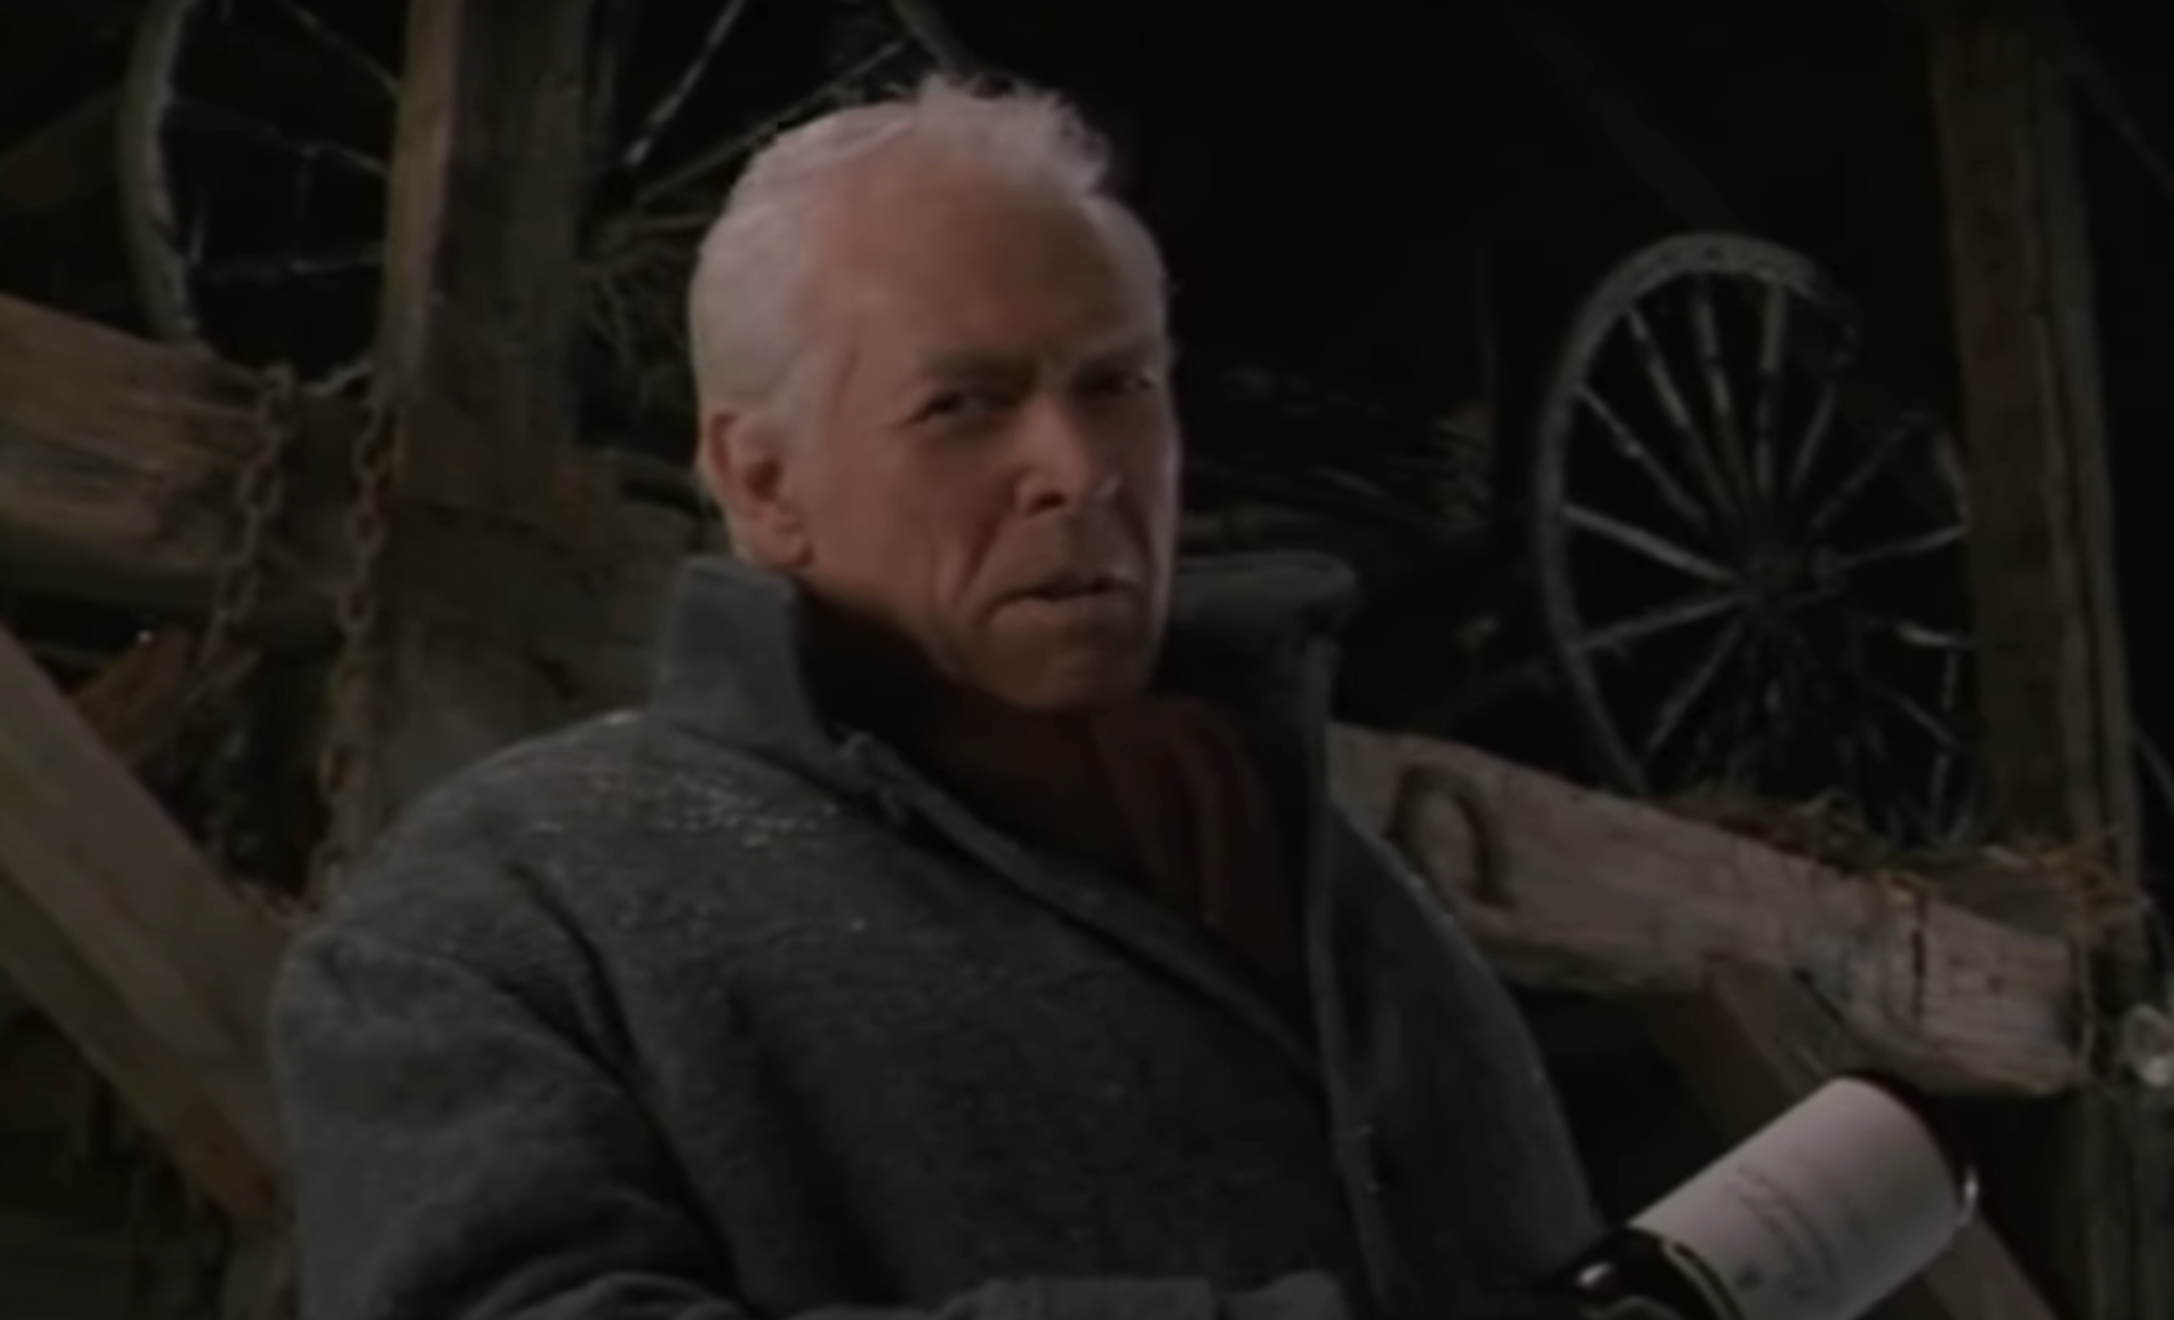 Clint Eastwood in a scene, wearing a coat, by a wooden structure